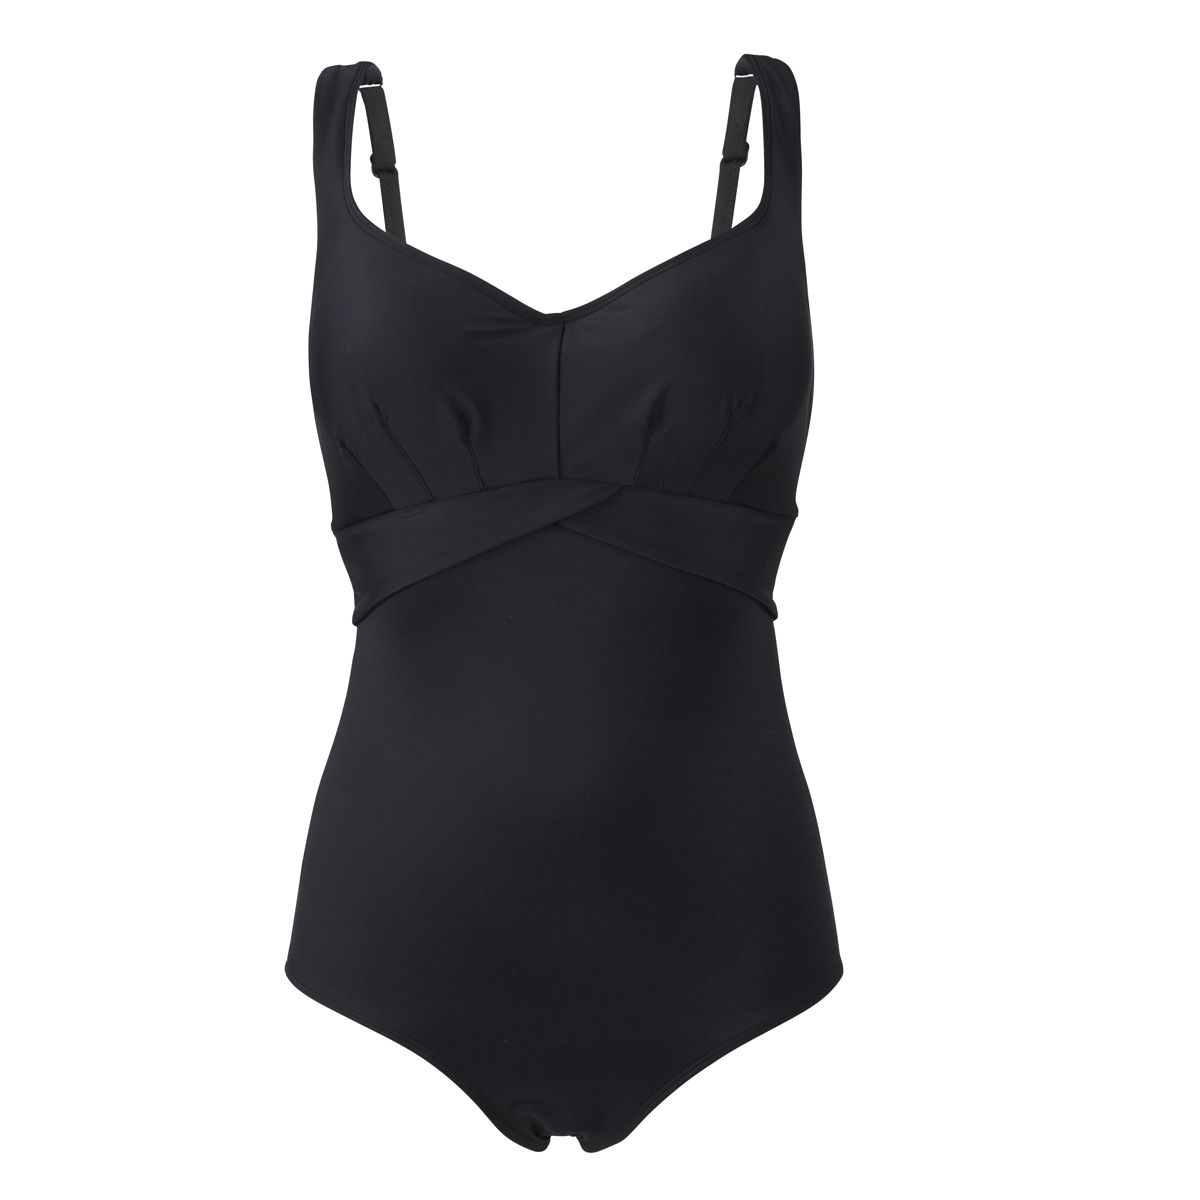 The ultimate LBS (Little Black Swimsuit) by Panache - swimsuit ideas